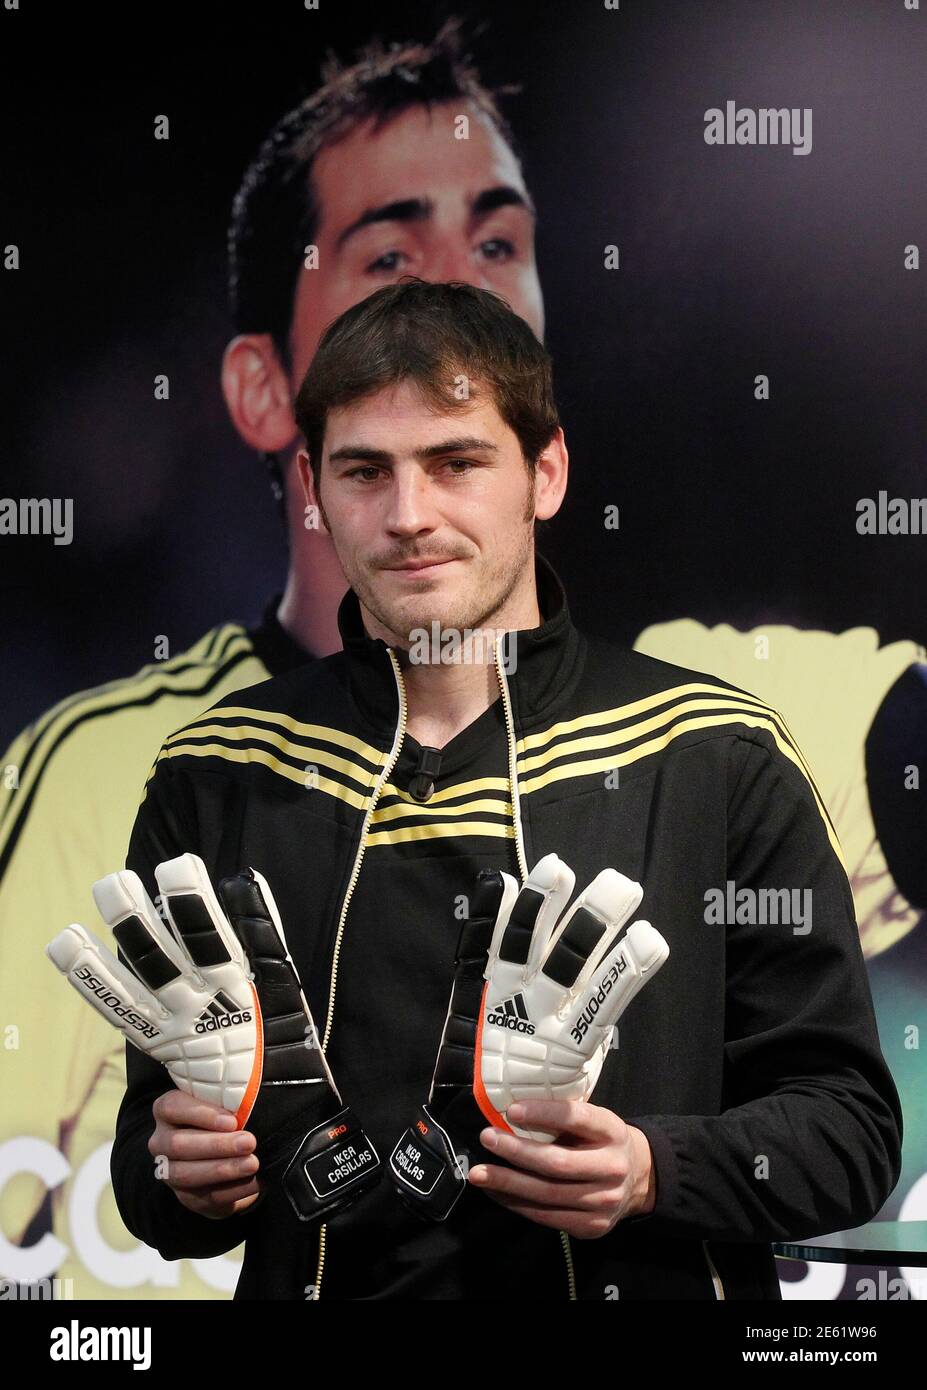 Real Madrid goalkeeper Iker Casillas poses with a pair of new gloves during  the unveiling of his Adidas sponsorship at Santiago Bernabeu stadium in  Madrid January 12, 2012. REUTERS/Andrea Comas (SPAIN -